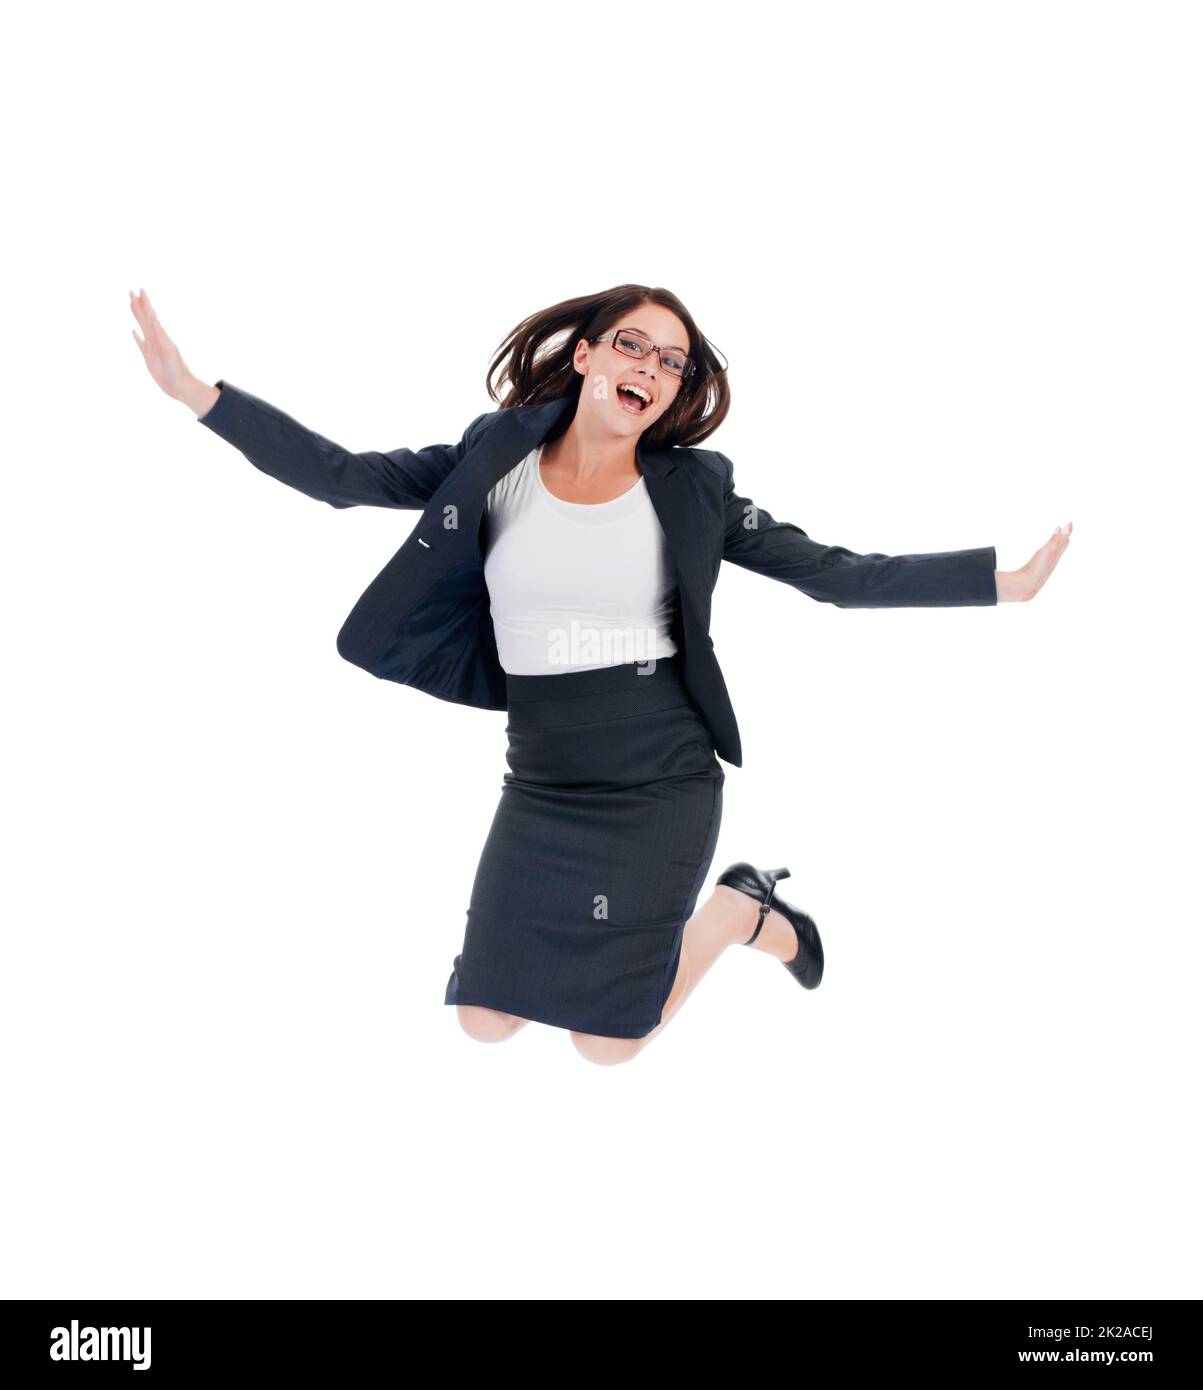 Success has her over the moon. Studio shot of an ecstatic looking businesswomen jumping for joy isolated on white. Stock Photo